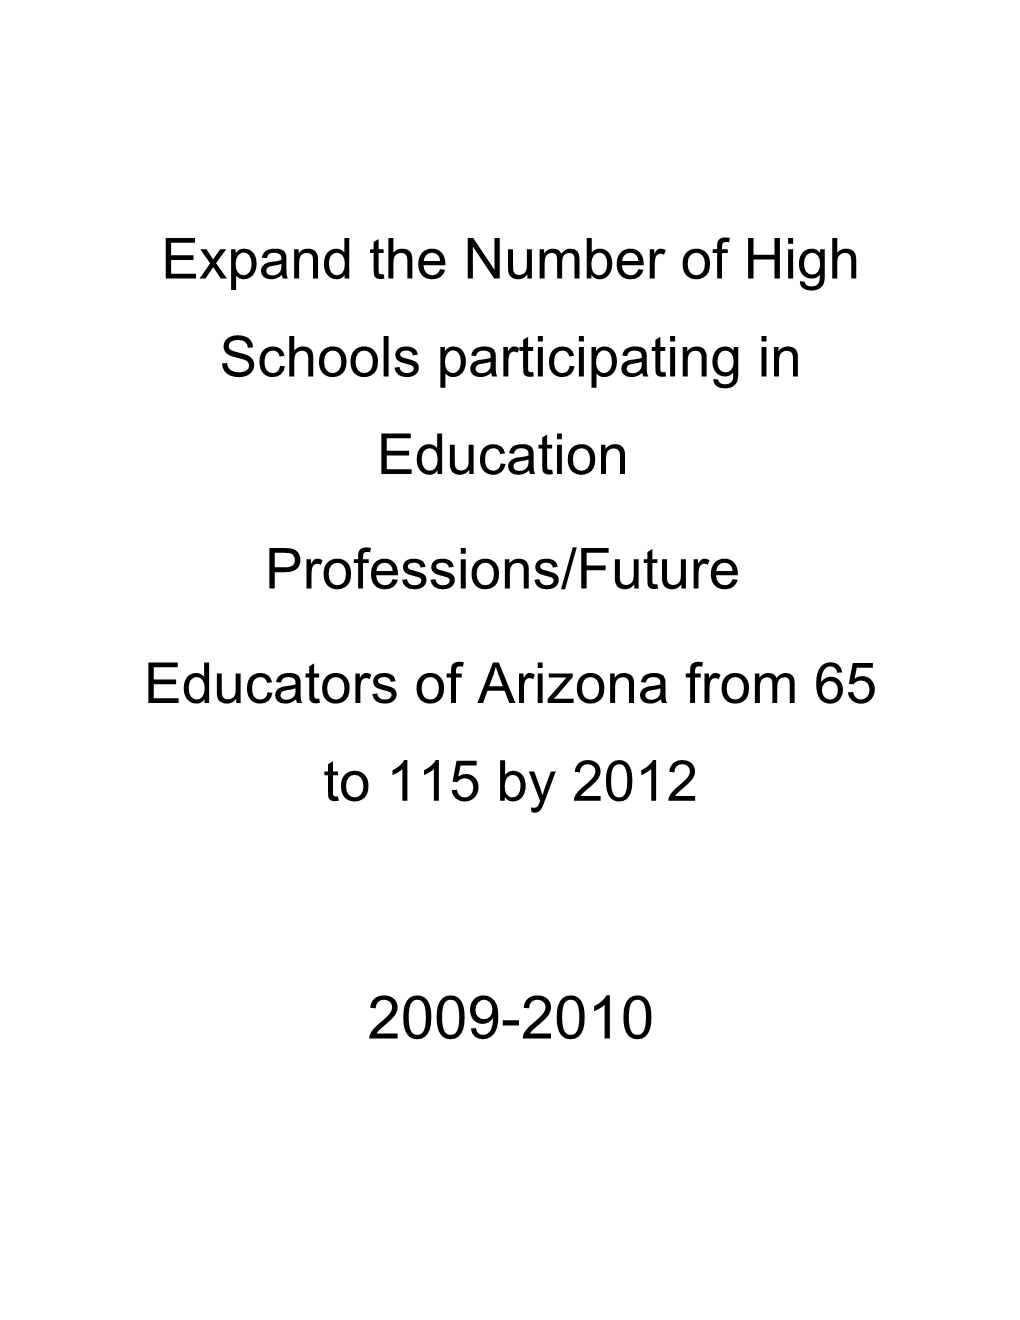 Expand the Number of High Schools Participating in Education